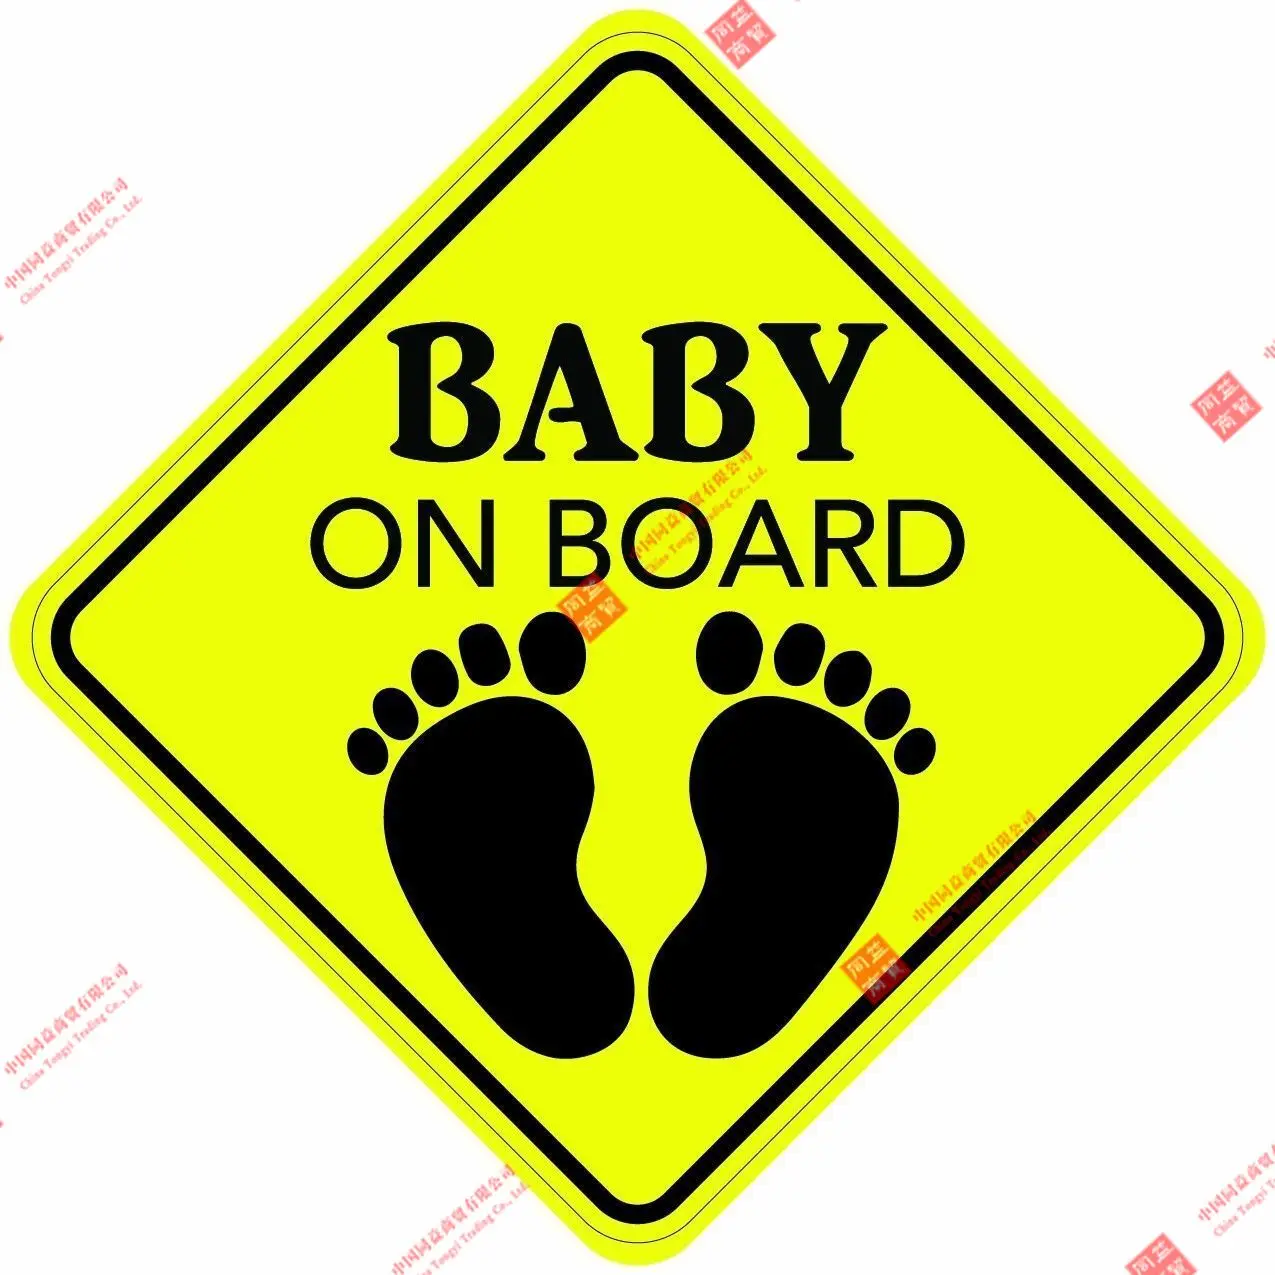 

Warning BABY ON BOARD Sign Sticker Decal Buy 2, Get 3rd FREE Made In The USA Racing Motorcycle Helmet Stickers